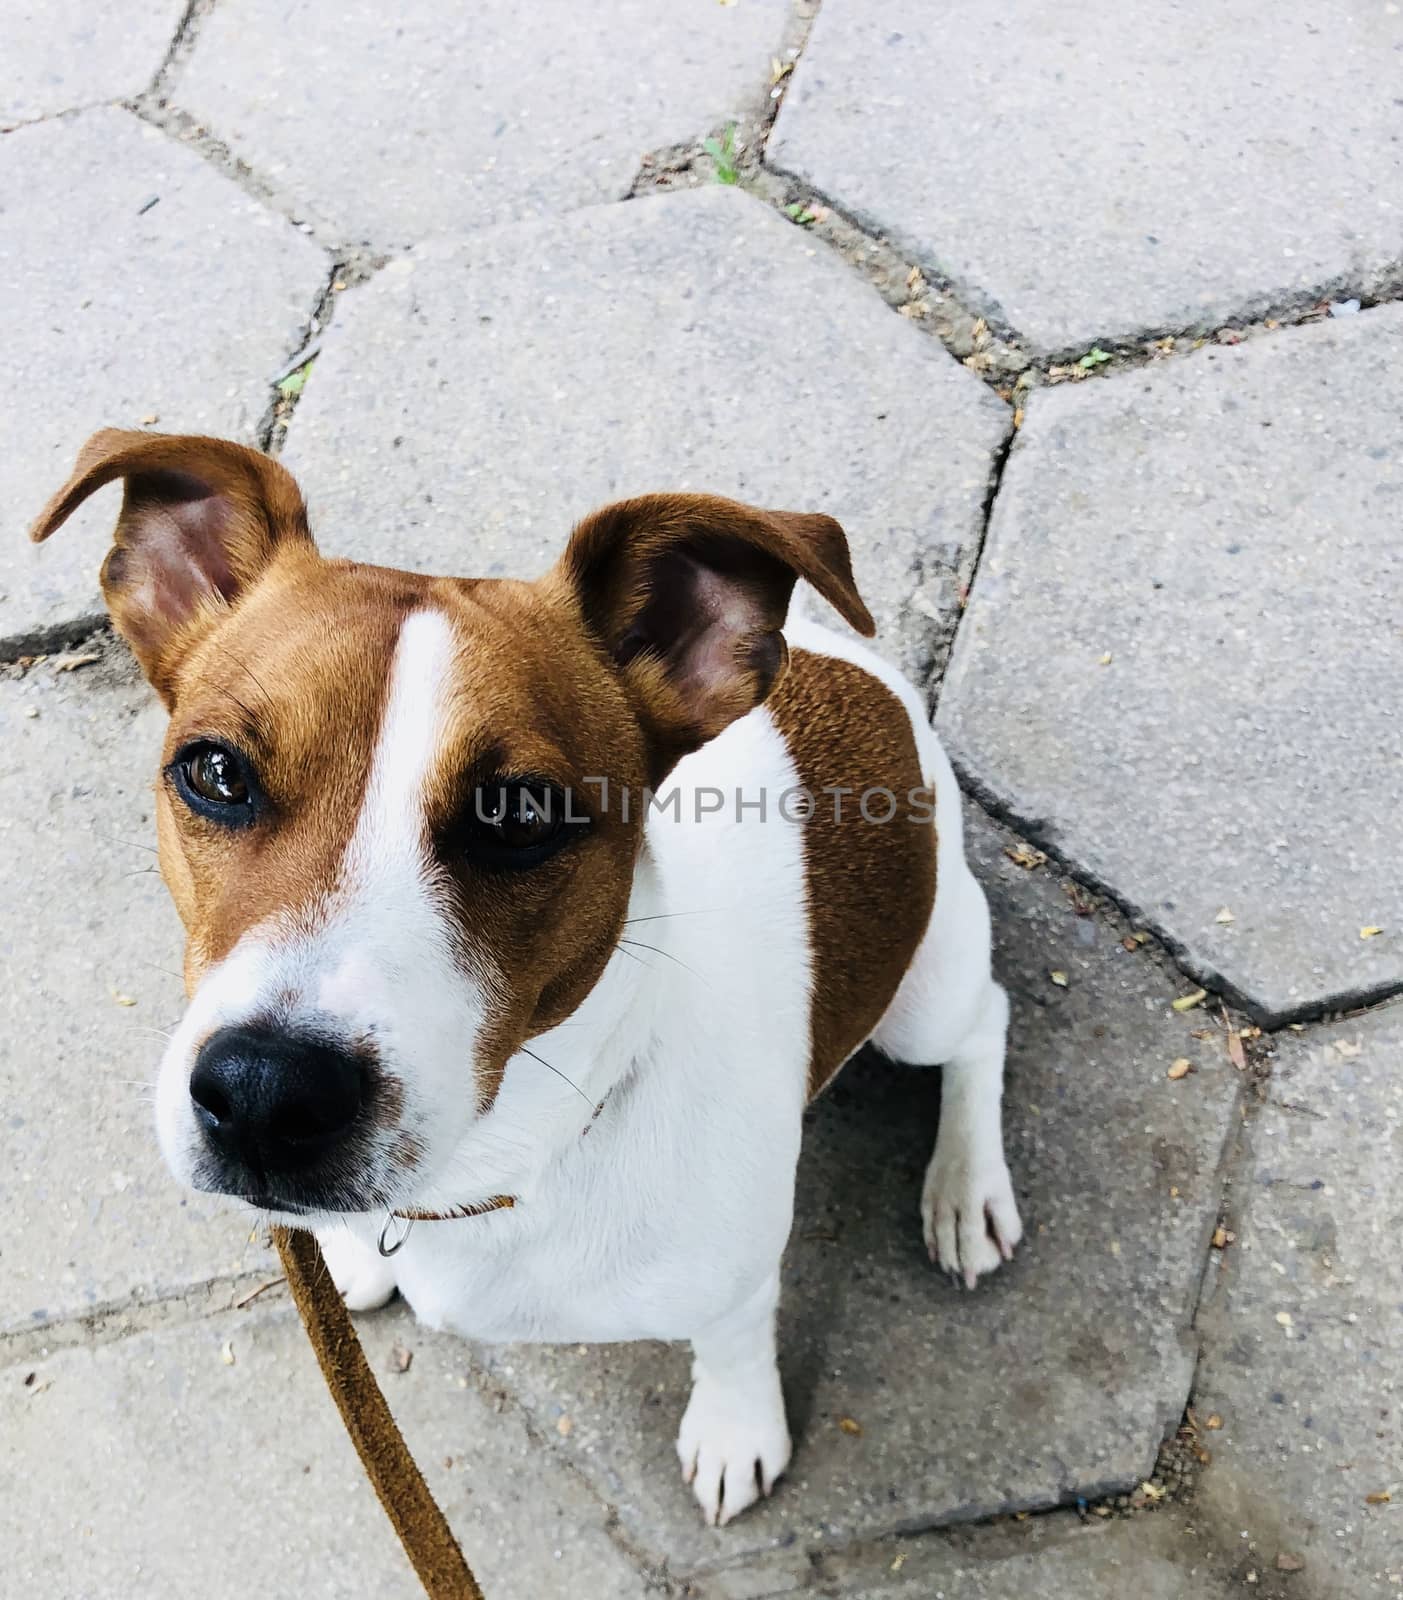 Jack russel dog pet white and brown on a leash  by F1b0nacci